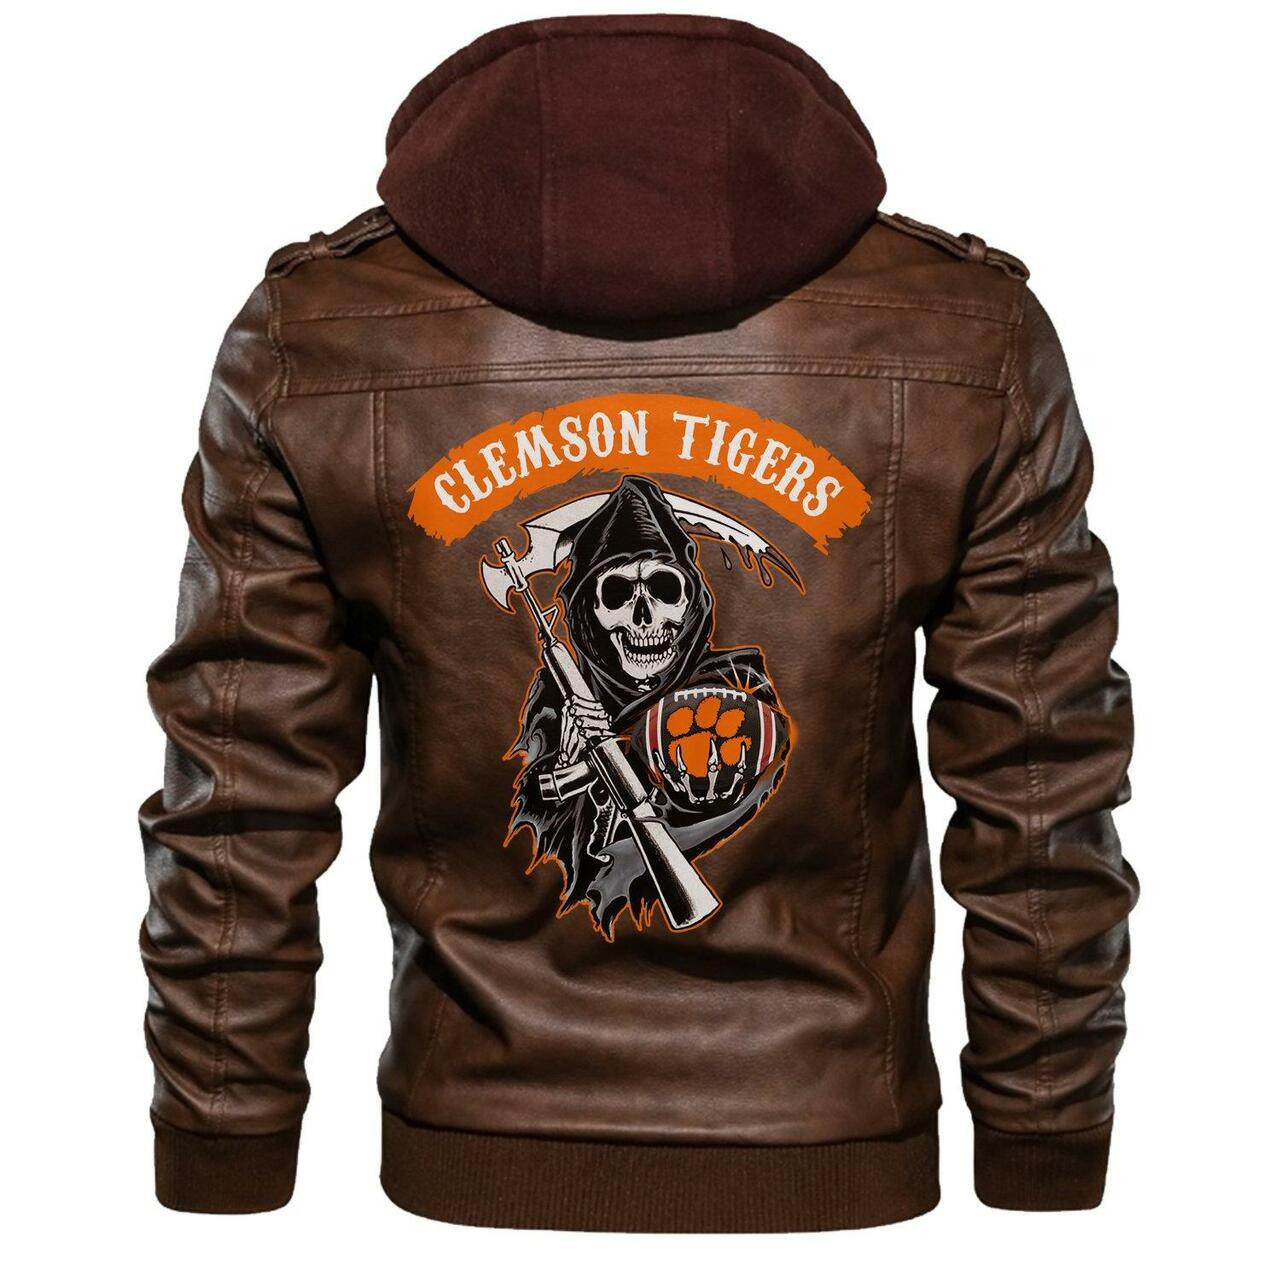 Check out and find the right leather jacket below 78